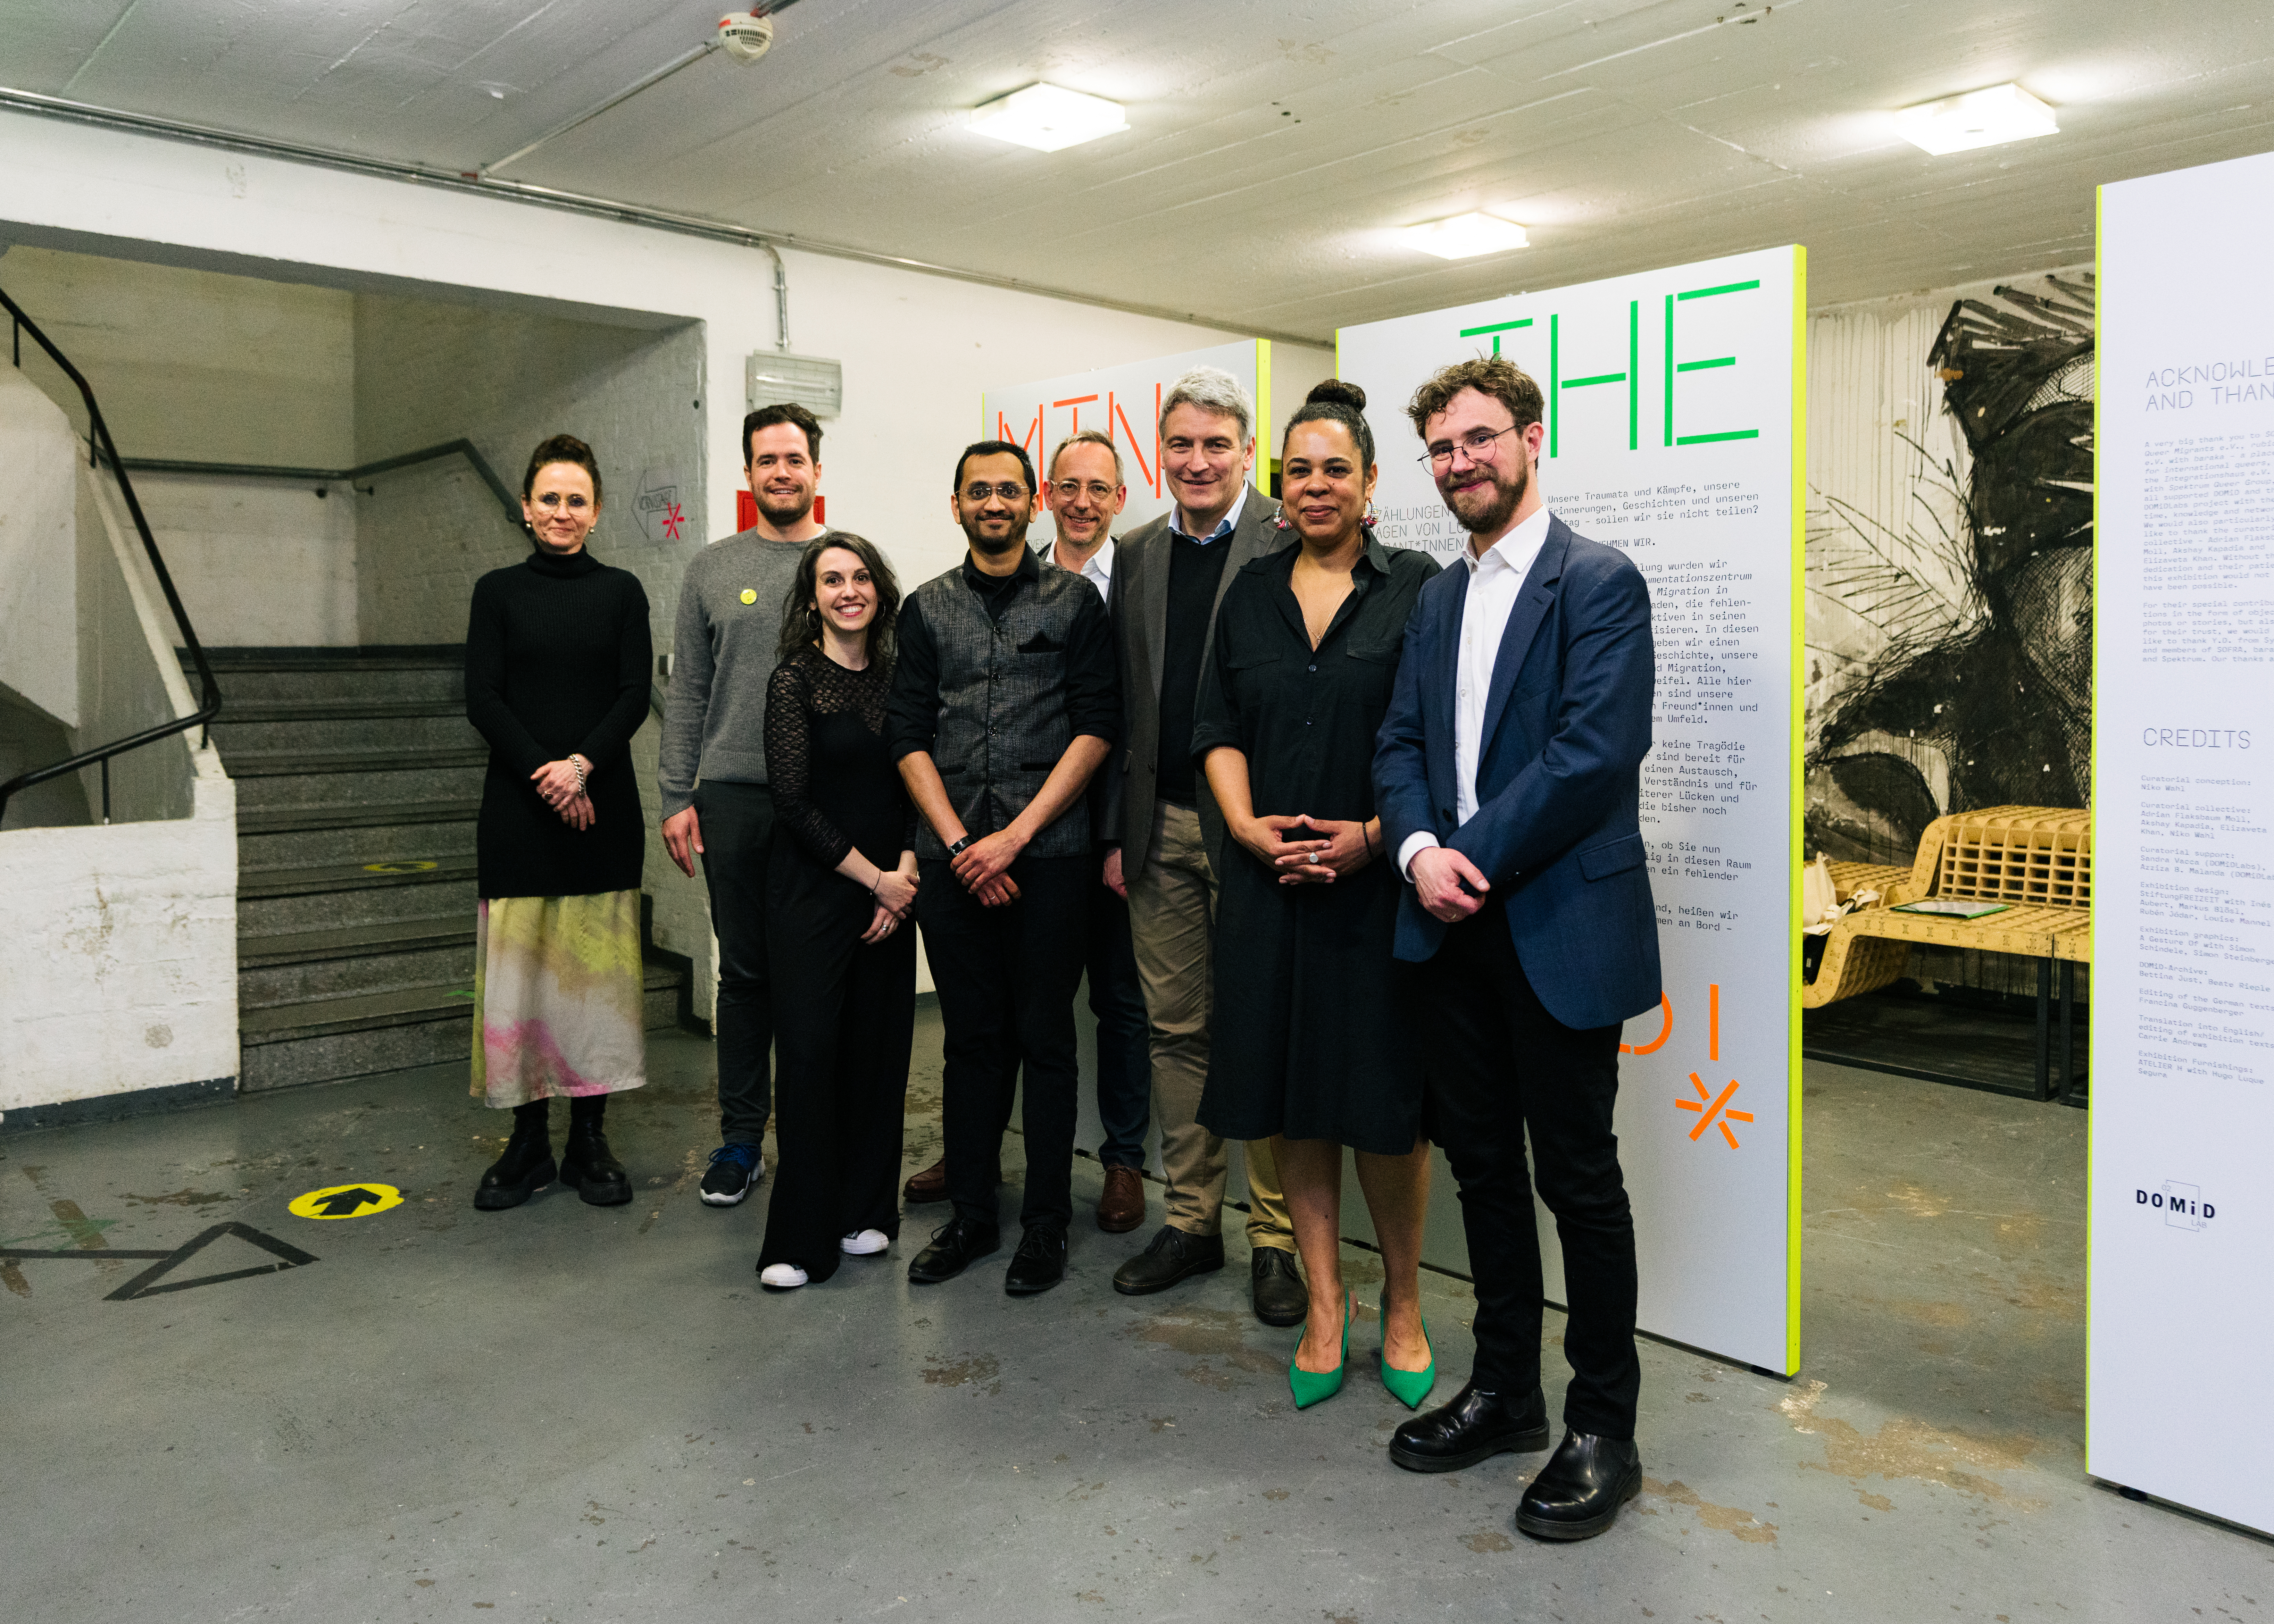 The exhibition was opened by (from left to right) Uta Schnell (Head of Funding and Programmes at the German Federal Cultural Foundation), Adrian Flaksbaum Moll (Curatorial Collective), Sandra Vacca (Project Manager DOMiDLabs), Akshay Kapadia (Curatorial Collective), Niko Wahl (Curatorial Collective), Lorenz Bahr (State Secretary for Integration at the MKJFGFI of the State of NRW), Azziza B. Malanda (PR/Public Relations, Deputy Project Manager DOMiDLabs), Dr. Robert Fuchs (Executive Director DOMiD). Photo: Fadi Elias – In-Haus Media 2023